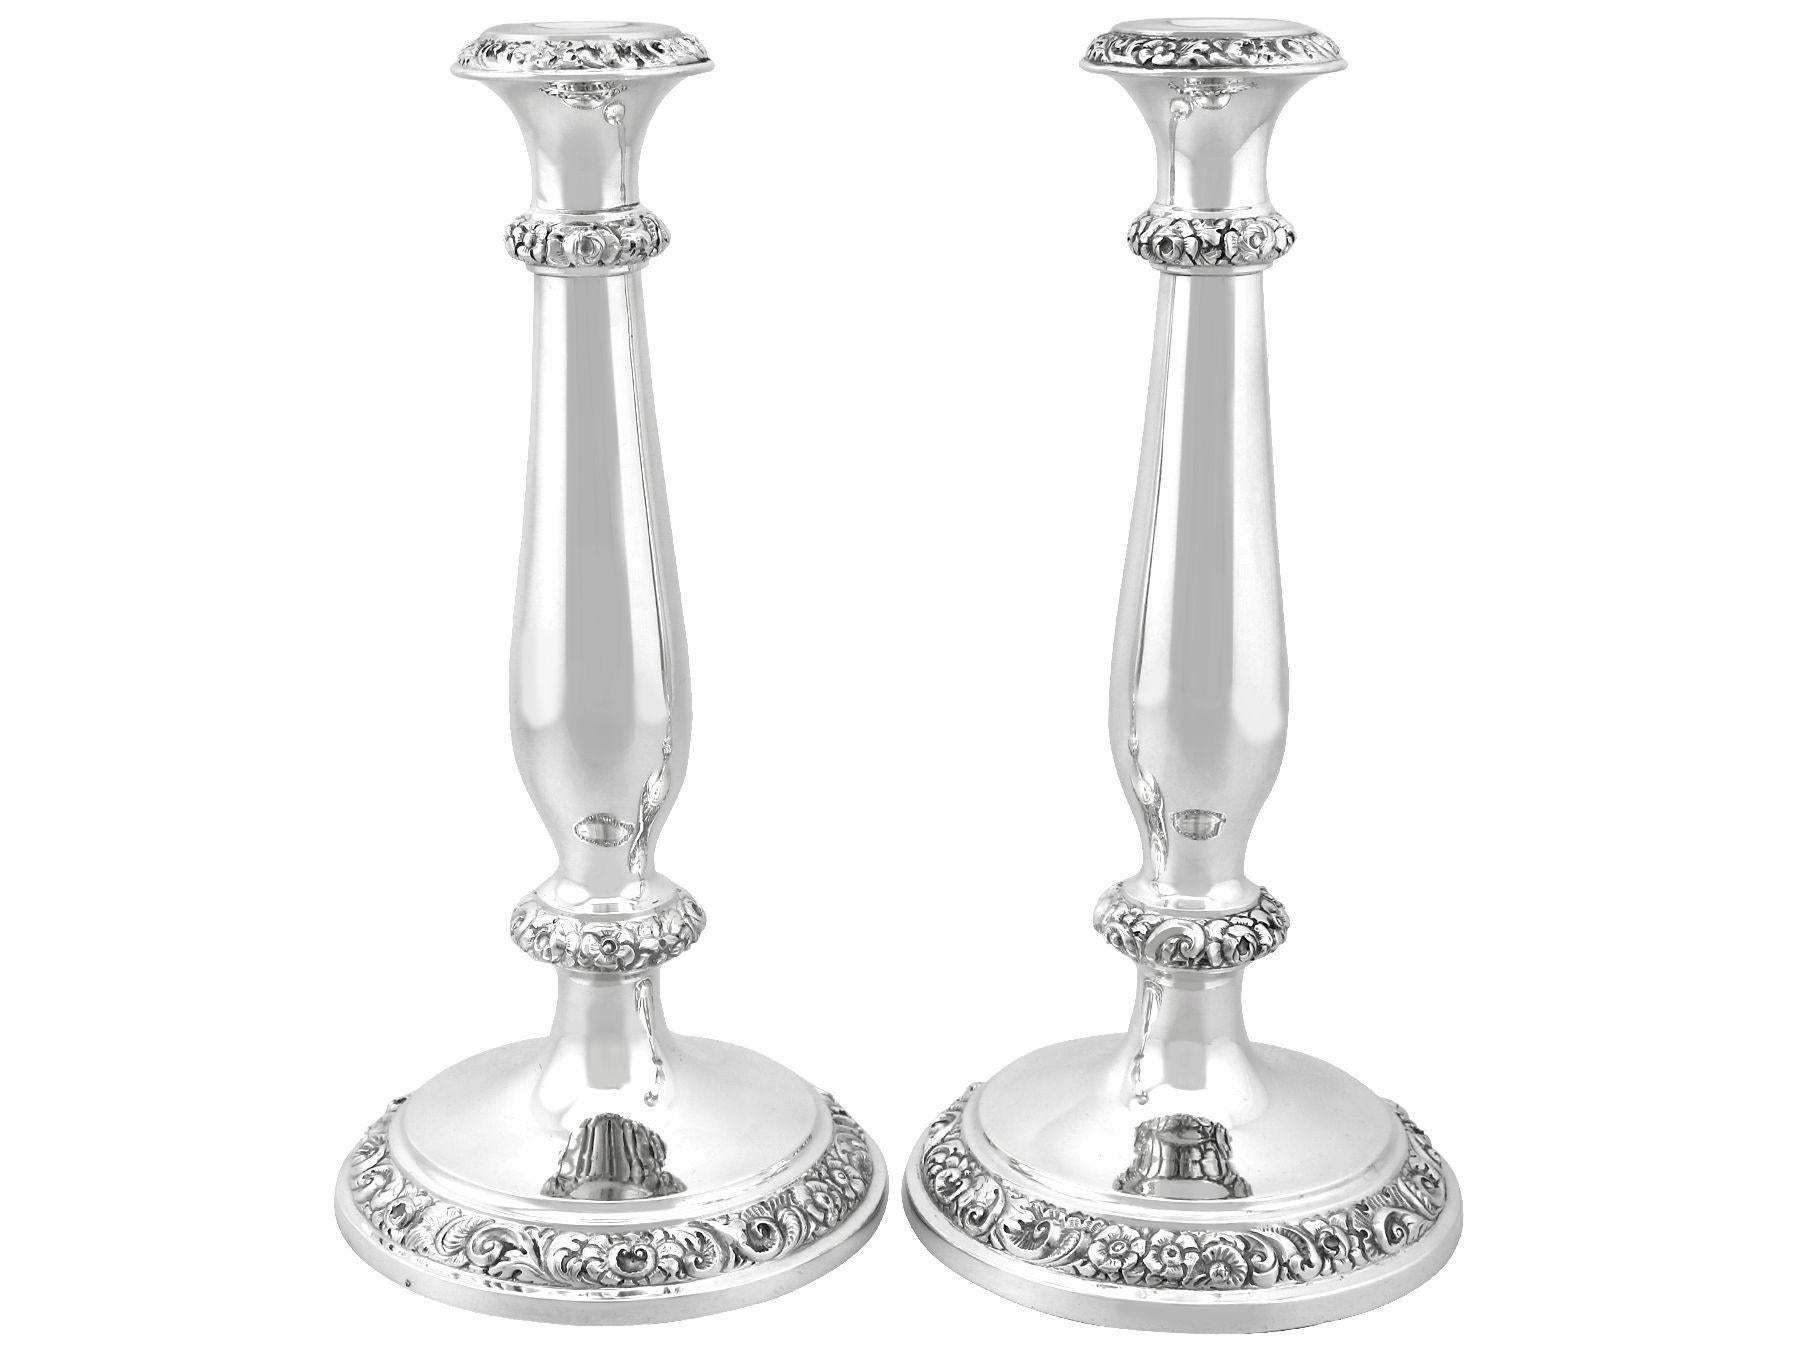 Antique Austrian Silver Candle Holders In Excellent Condition For Sale In Jesmond, Newcastle Upon Tyne